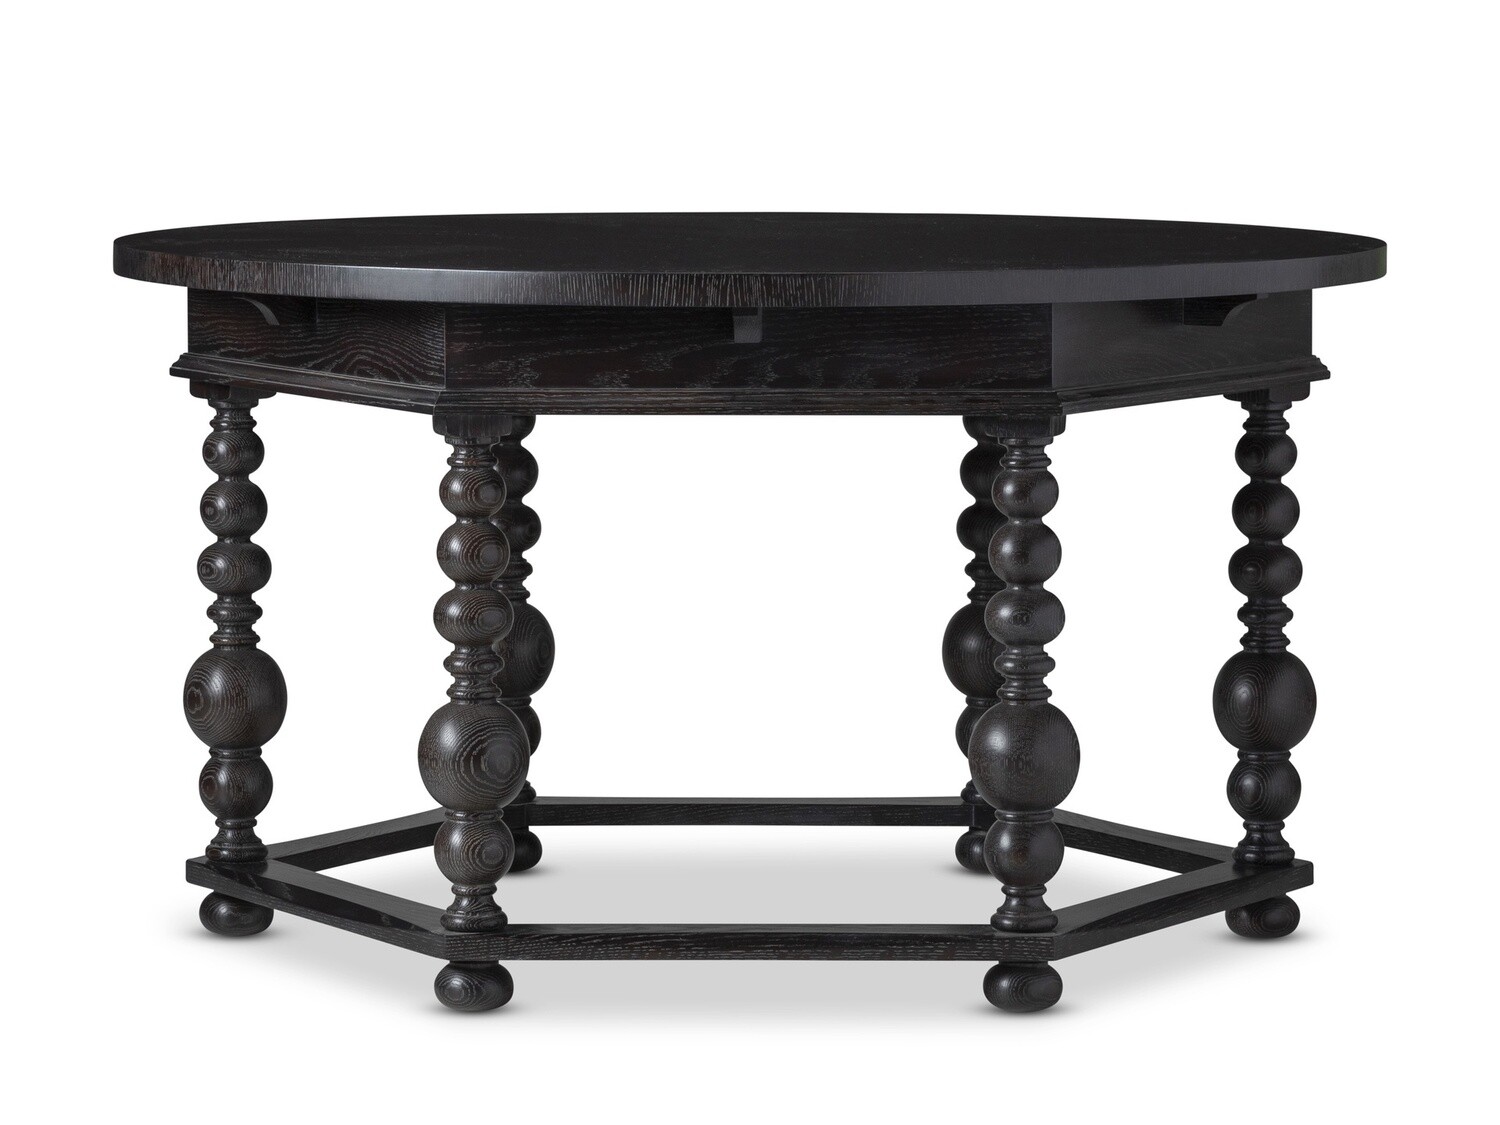 CAMPANIL ENTRY TABLE